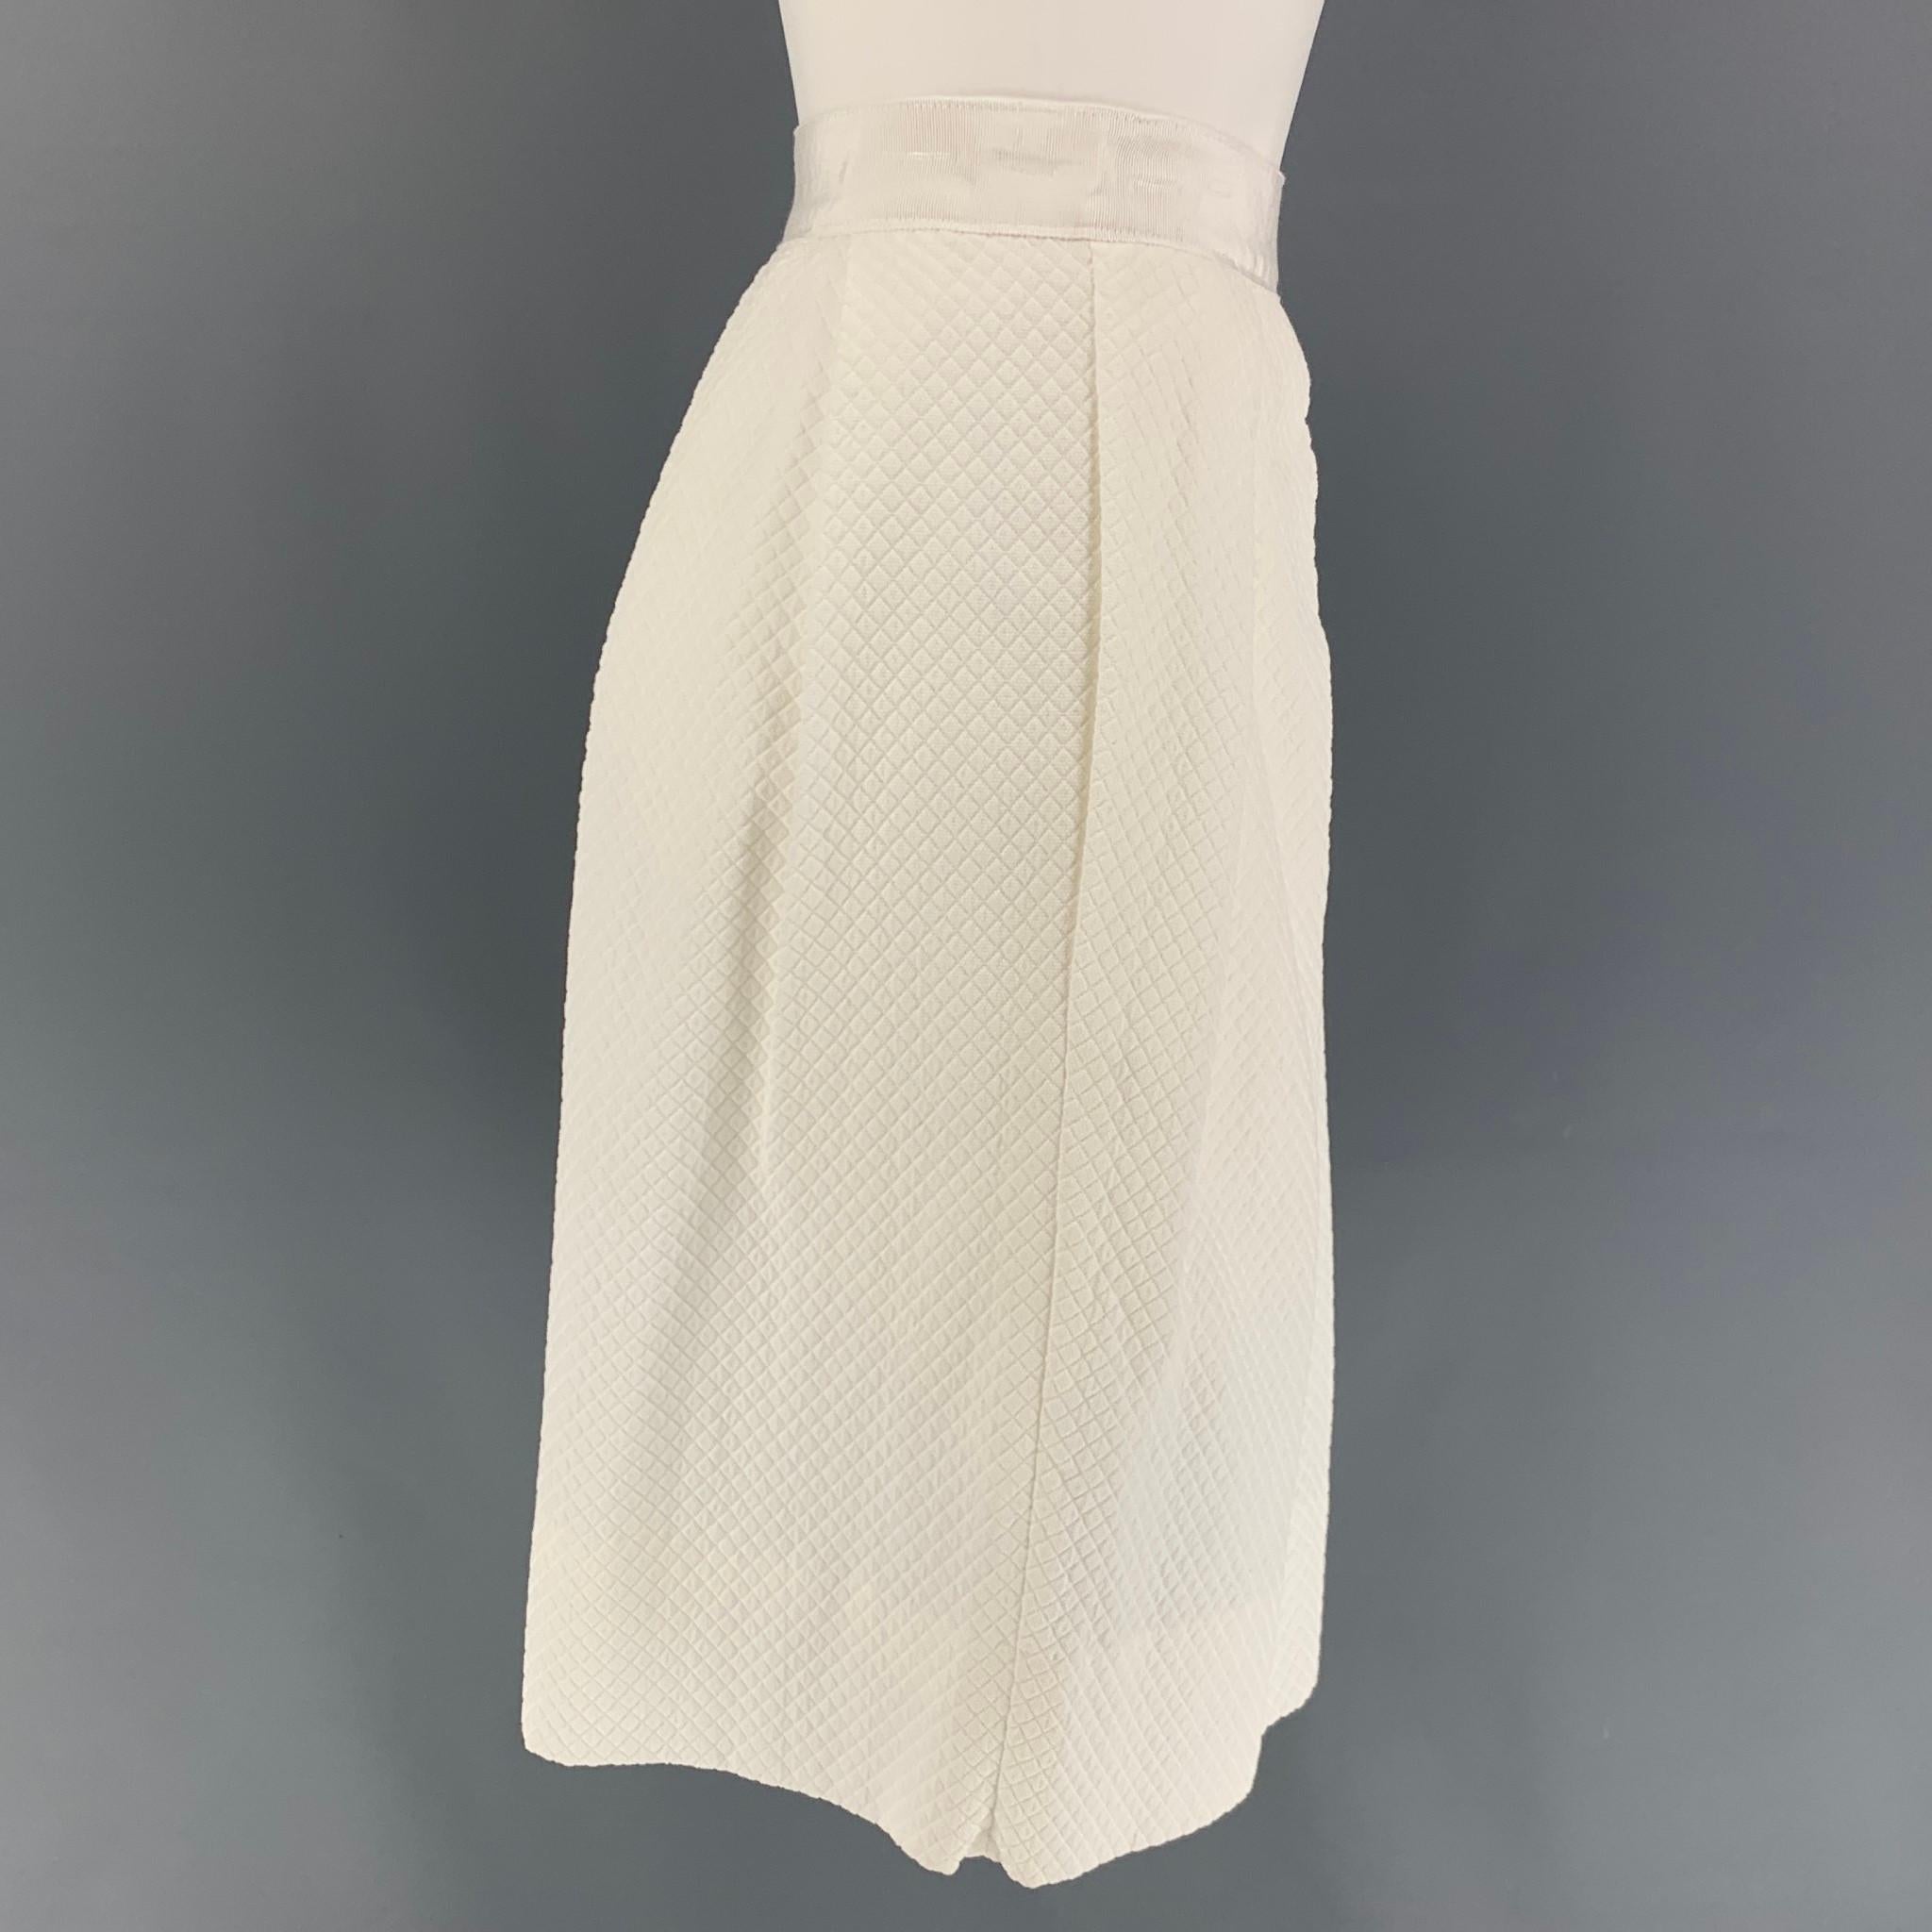 LIDA BADAY skirt comes in a off white rhombus polyamide featuring a pleated style, ribbon waist trim, slit pockets, and a side zipper closure. 

New With Tags. 
Marked: 4
Original Retail Price: $795.00

Measurements:

Waist: 27 in.
Hip: 36